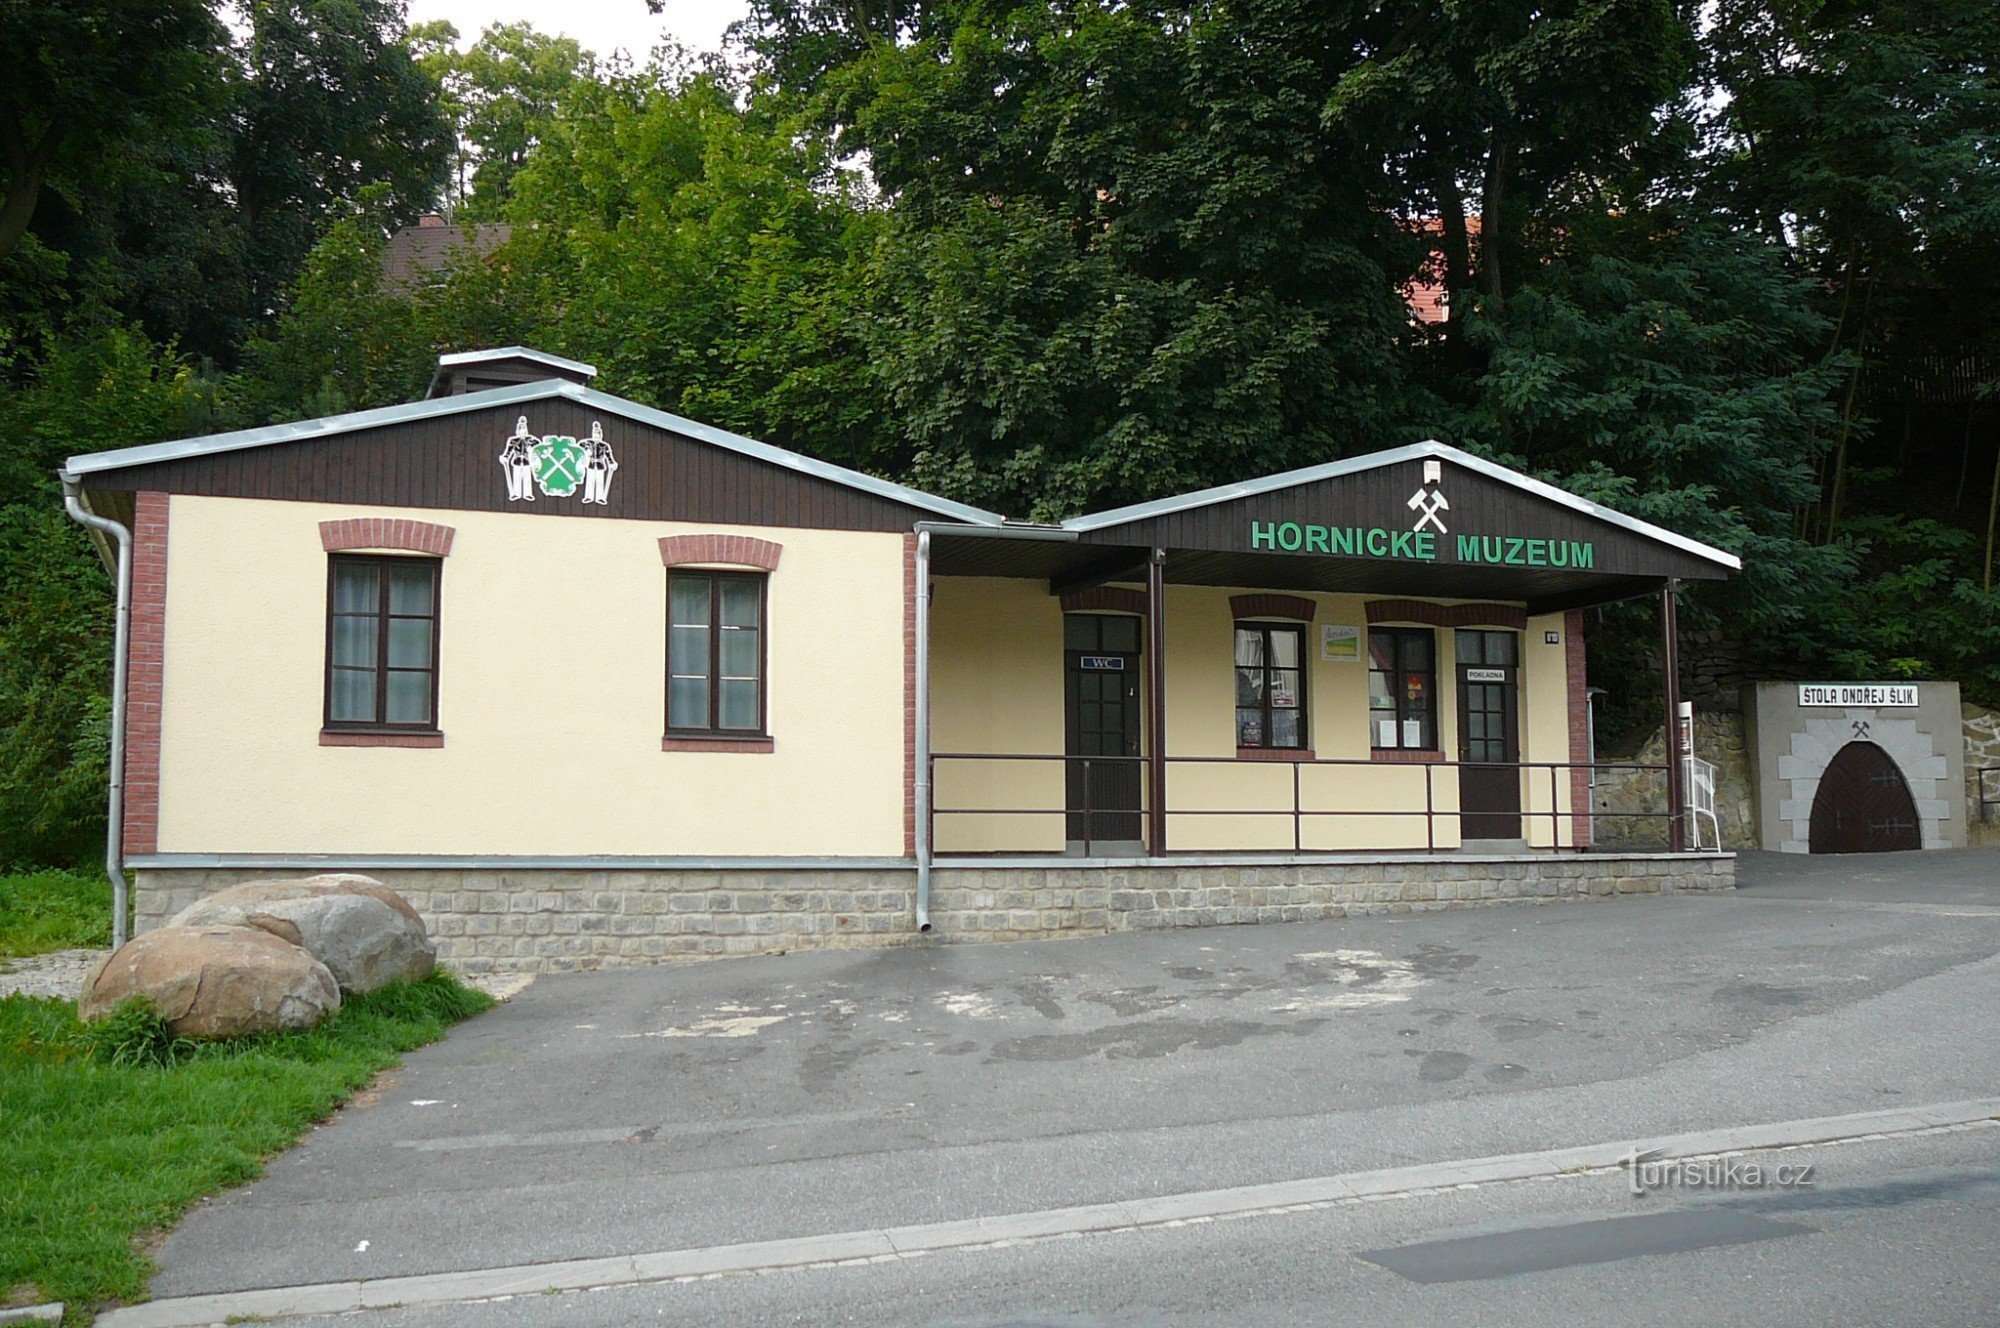 Administration building of the museum